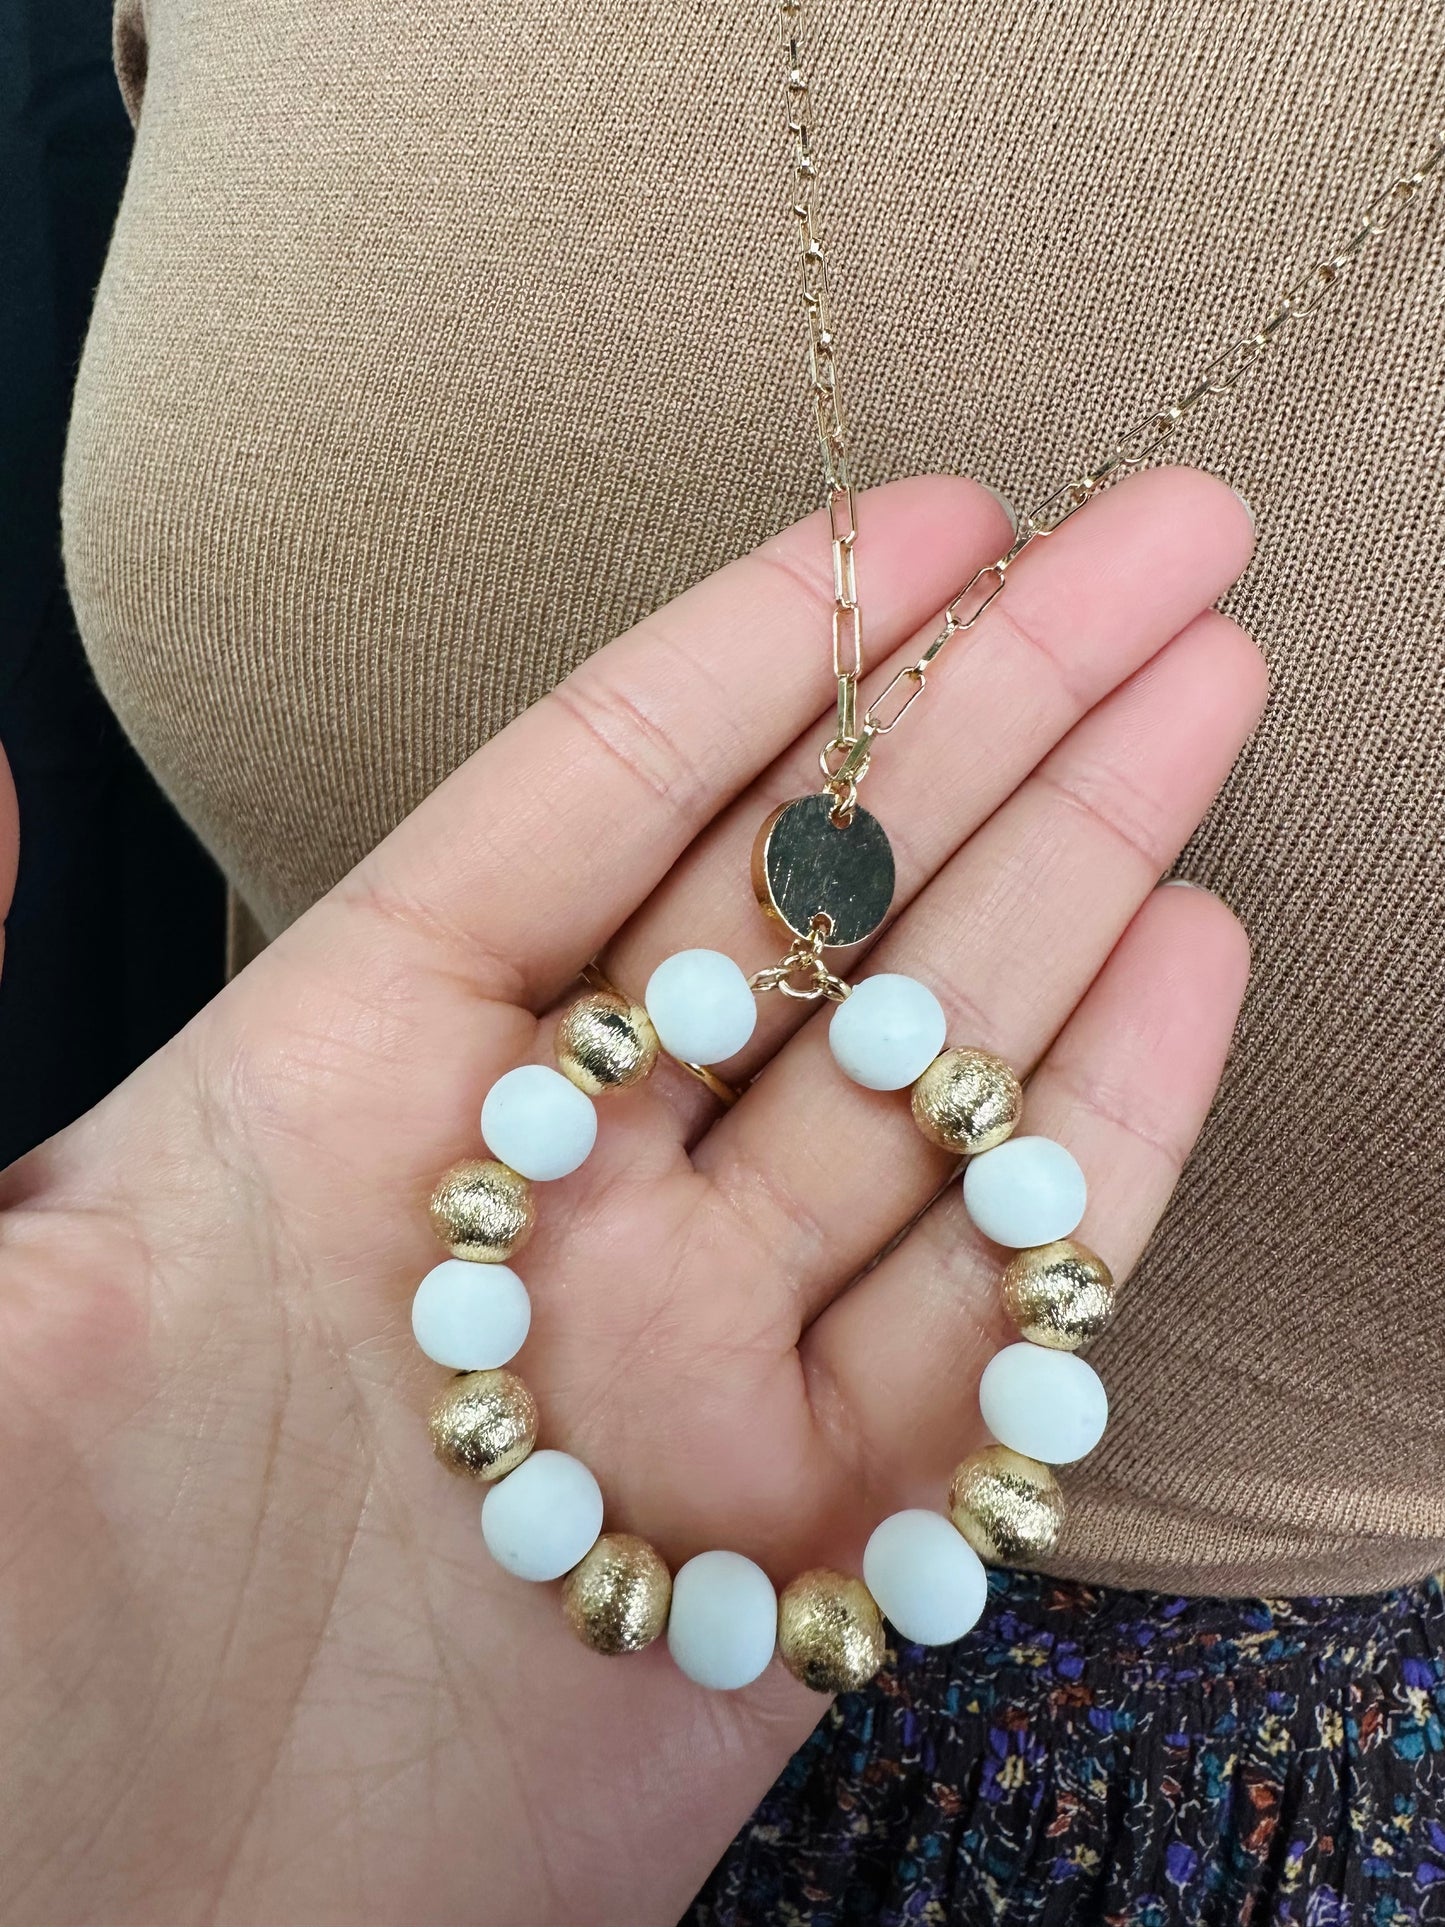 White Clay and Gold Necklace